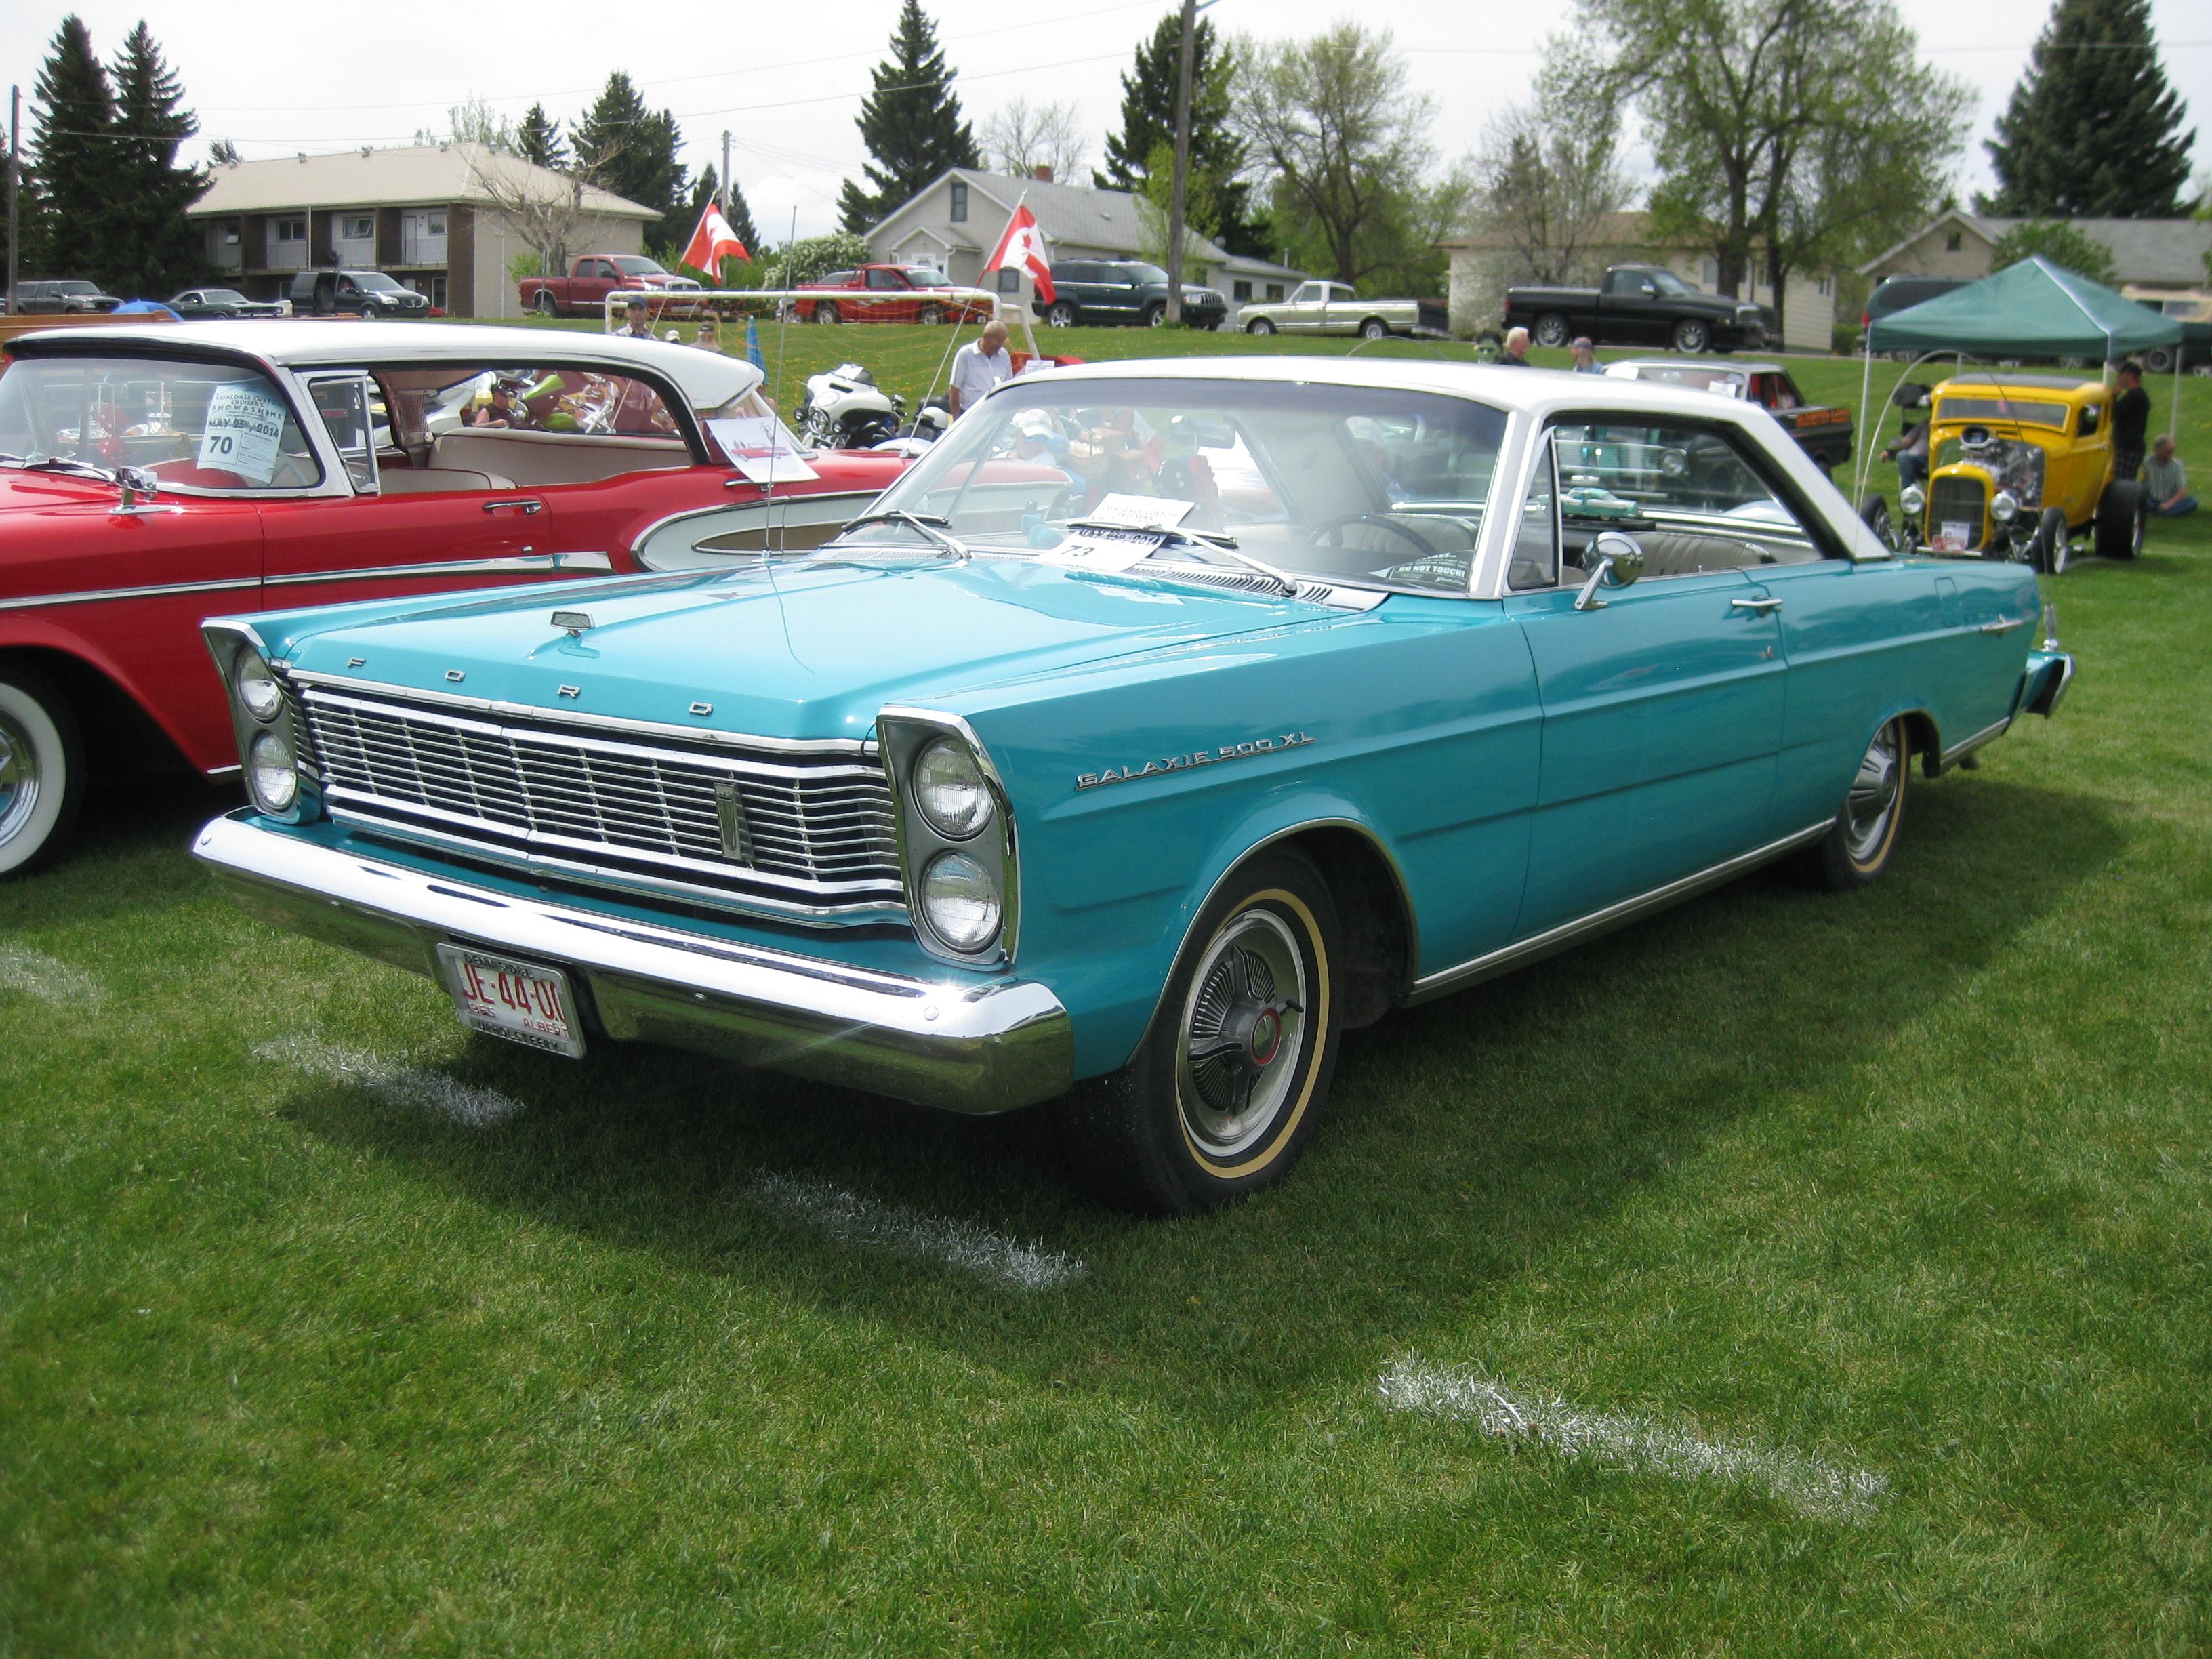 The 1966 Ford Galaxie is an underrated classic